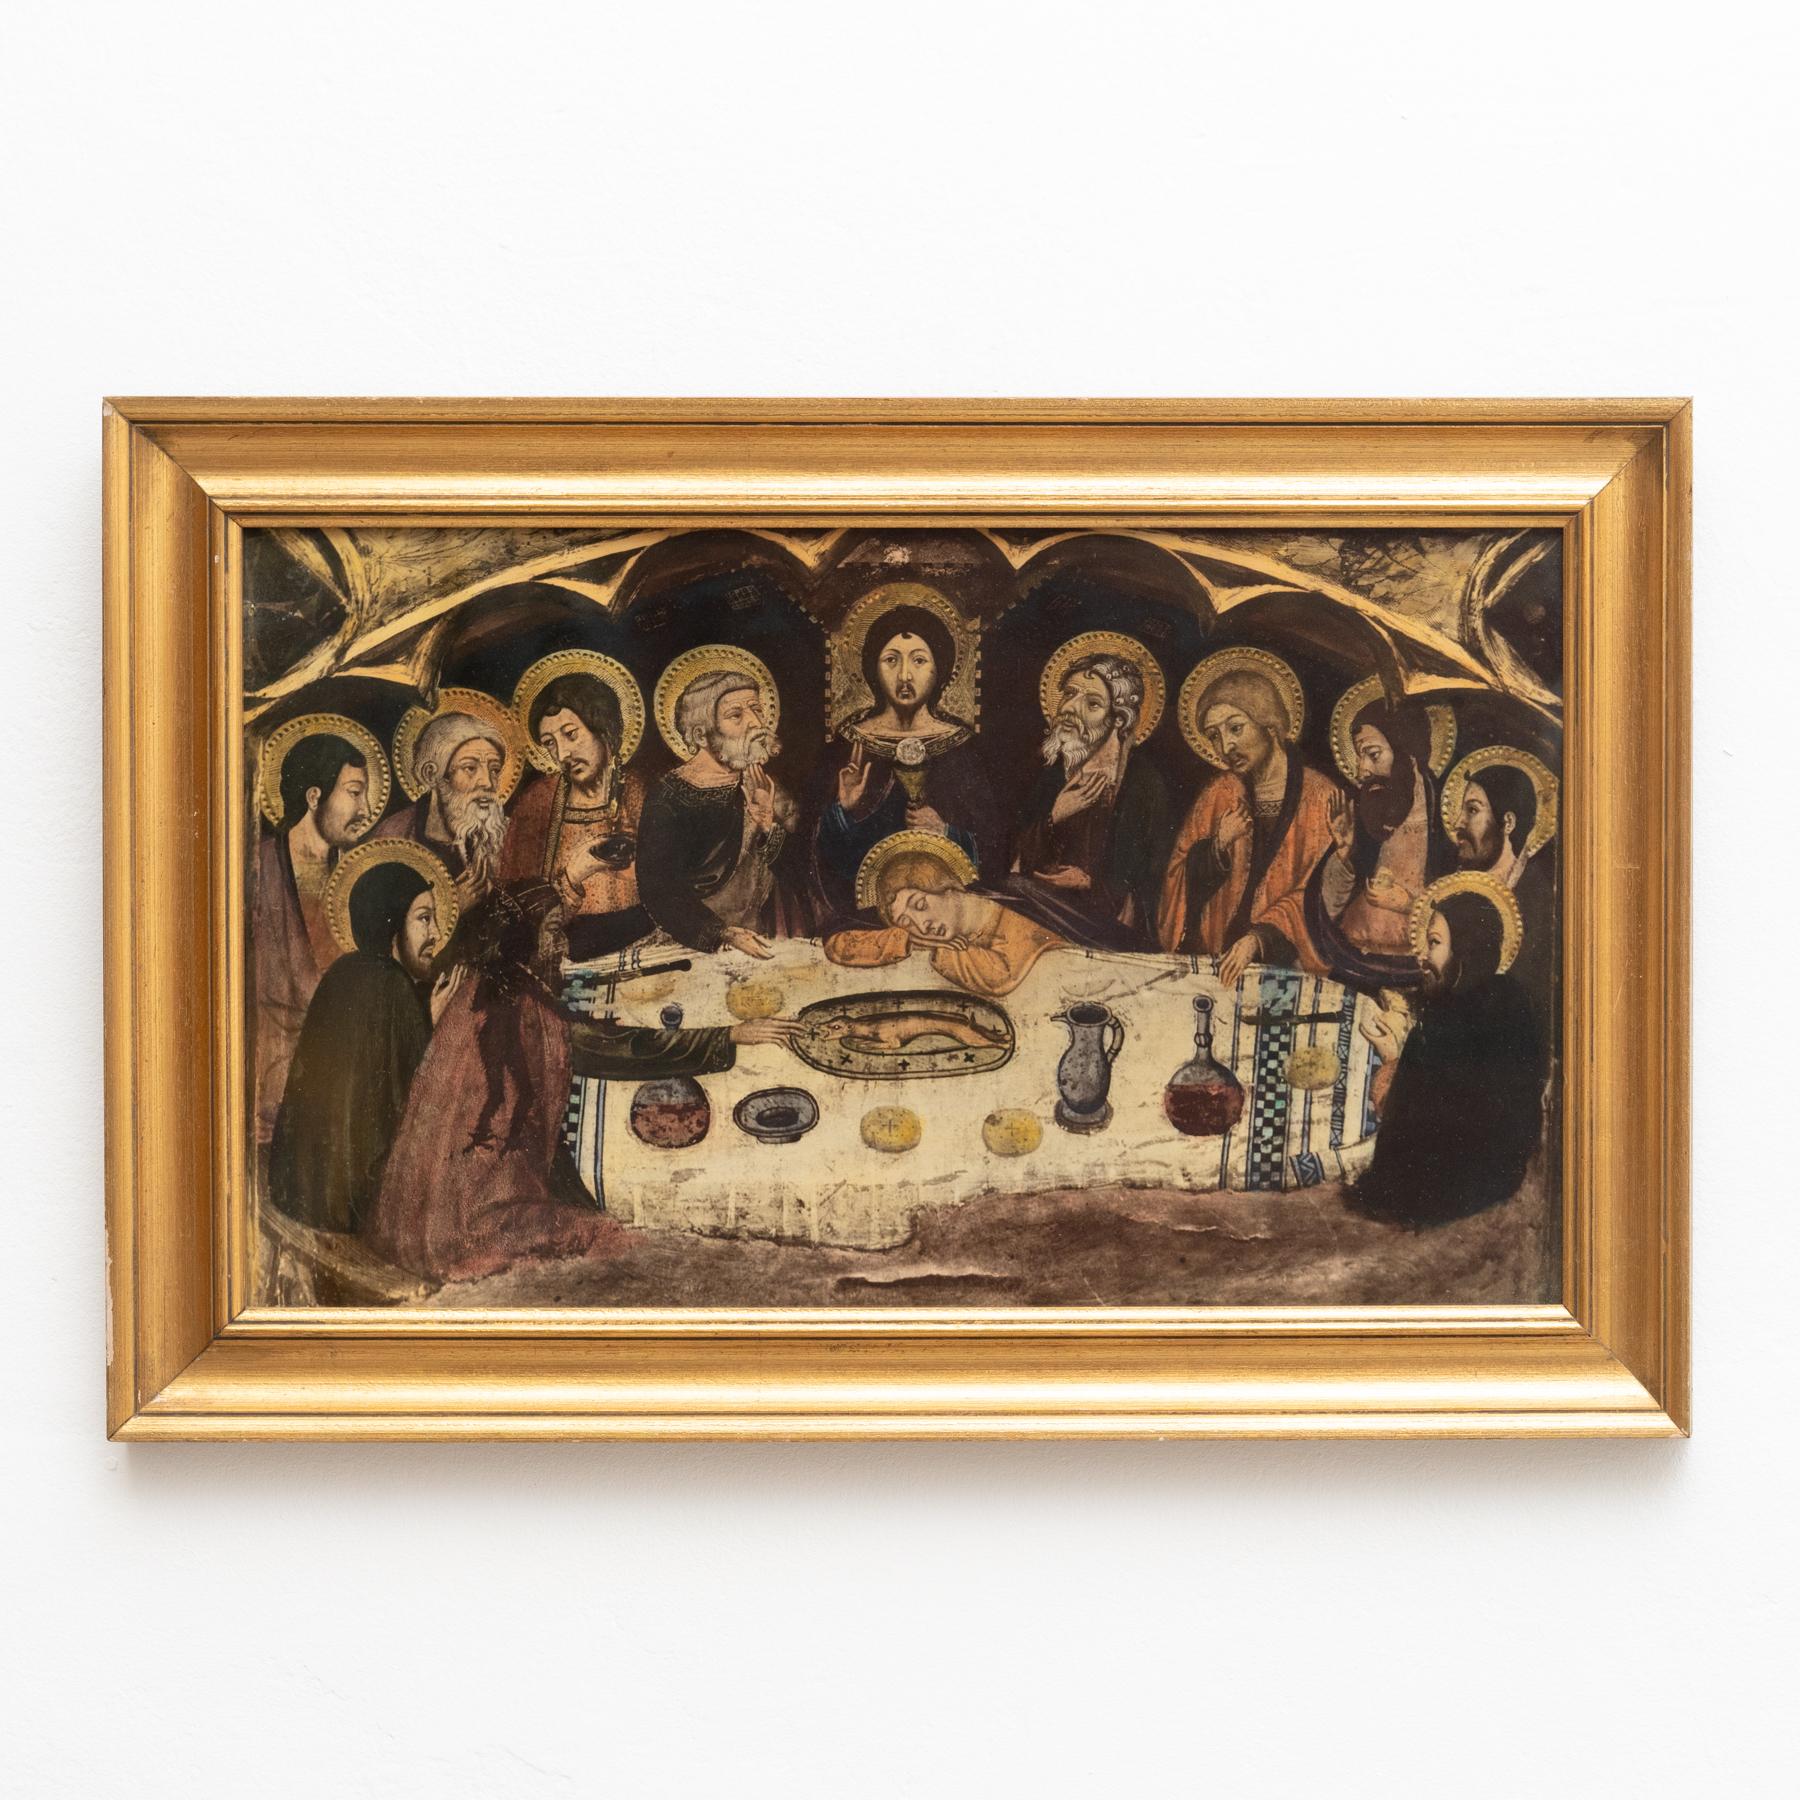 Vintage religious framed artwork, made by unknown artist.

Made in Spain, circa 1950.

In original condition, with minor wear consistent with age and use, preserving a beautiful patina. 

Materials:
Paper
Wood.

